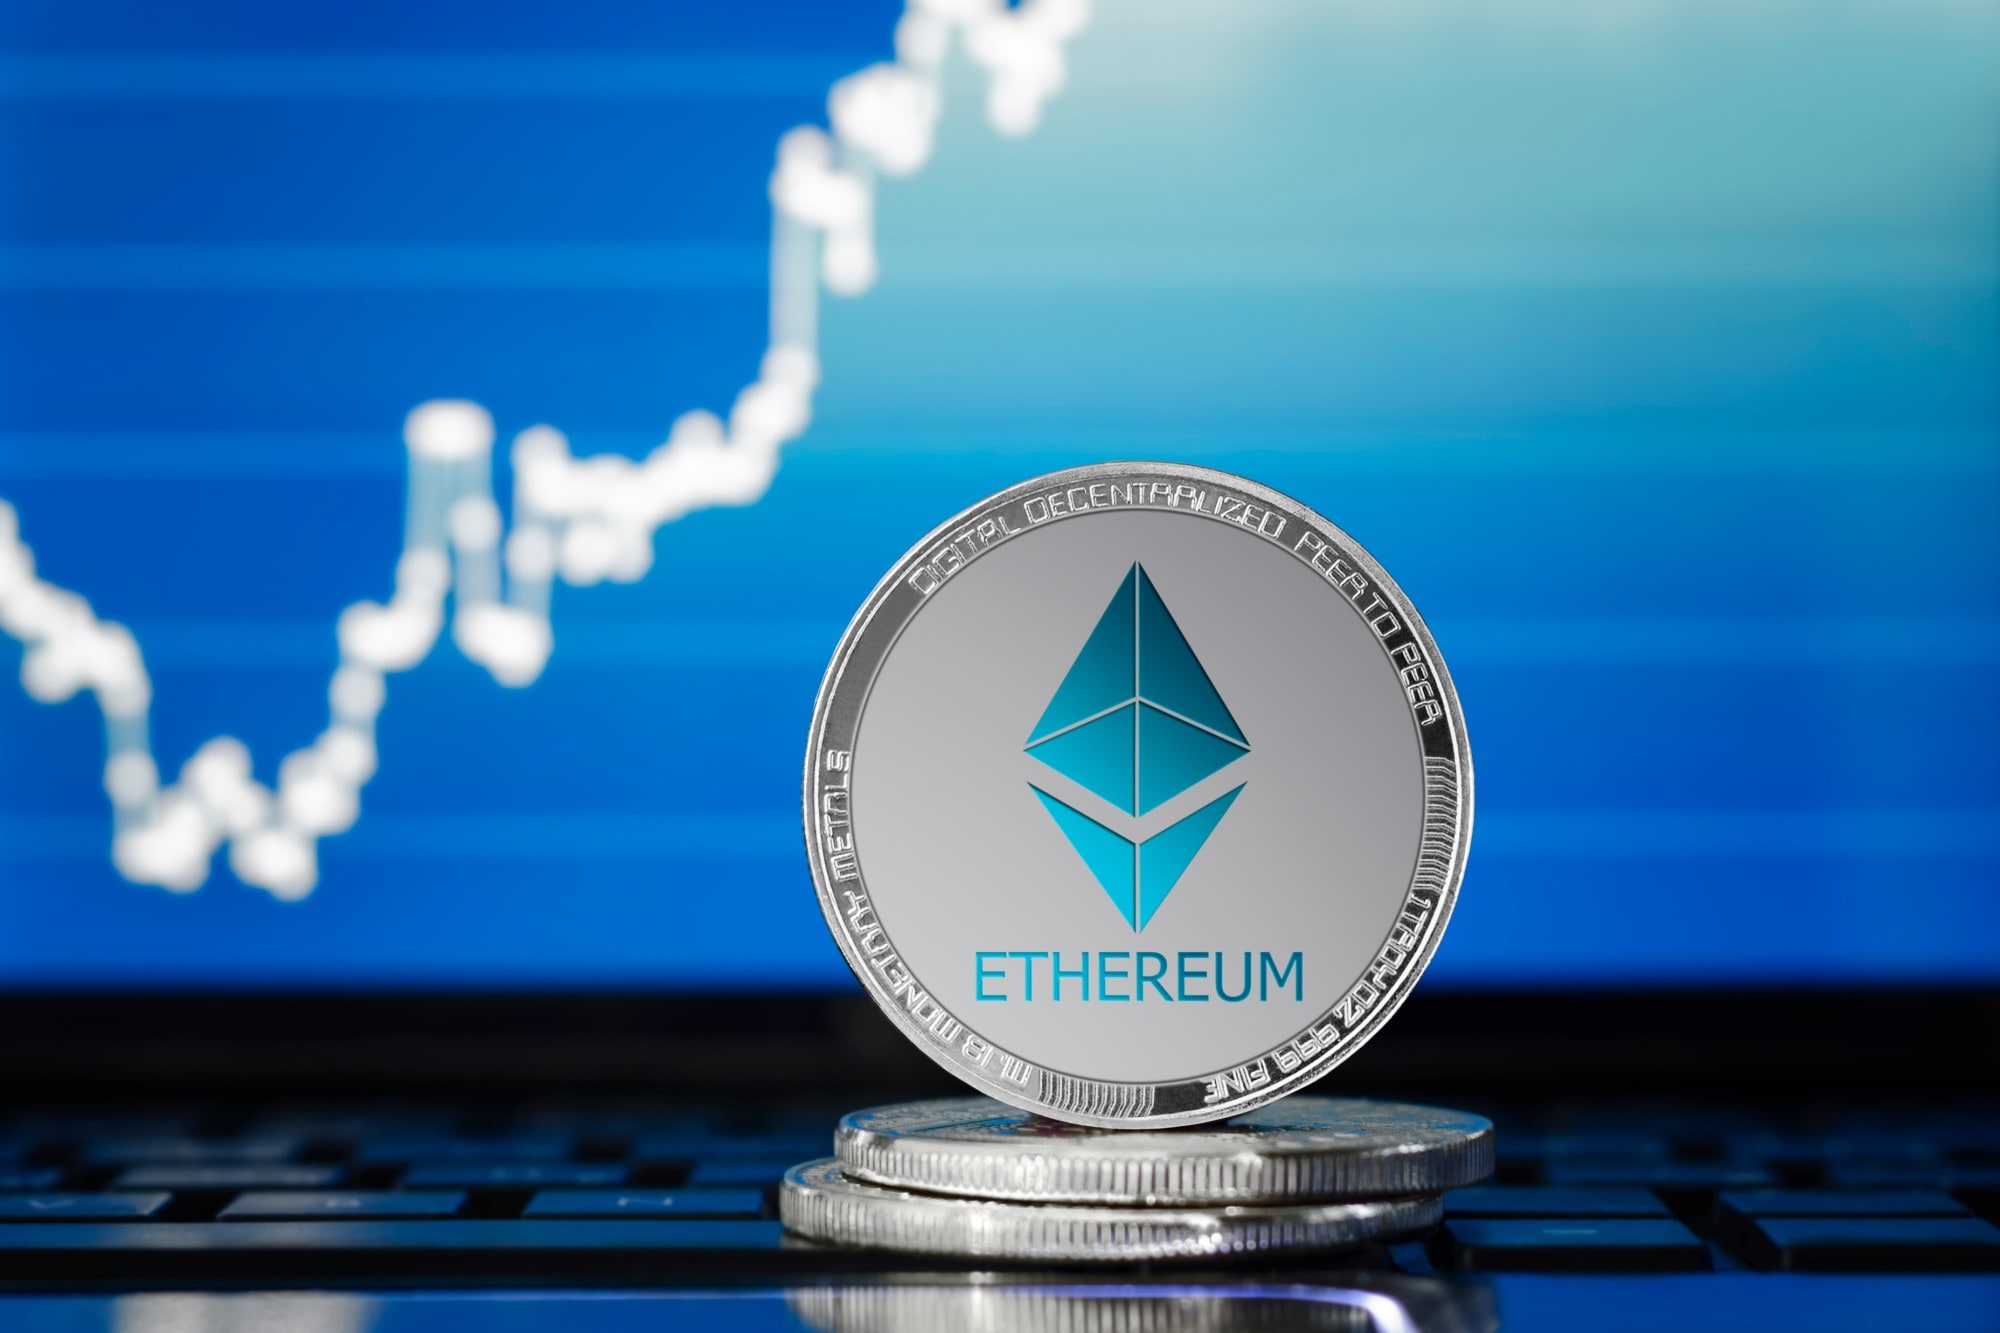  1. Ether:  Ether, based on the Ethereum blockchain, is slowly but steadily catching up to Bitcoin’s now reduced market cap. It has soared over four times this year, with its market cap rising to $380 billion. Its popularity soared as other crypto lending platforms started using its blockchain. Its use in decentralised finance or DeFi (blockchain-based financial services that aim to bypass banks/brokerages) doesn’t hurt investor optimism either.